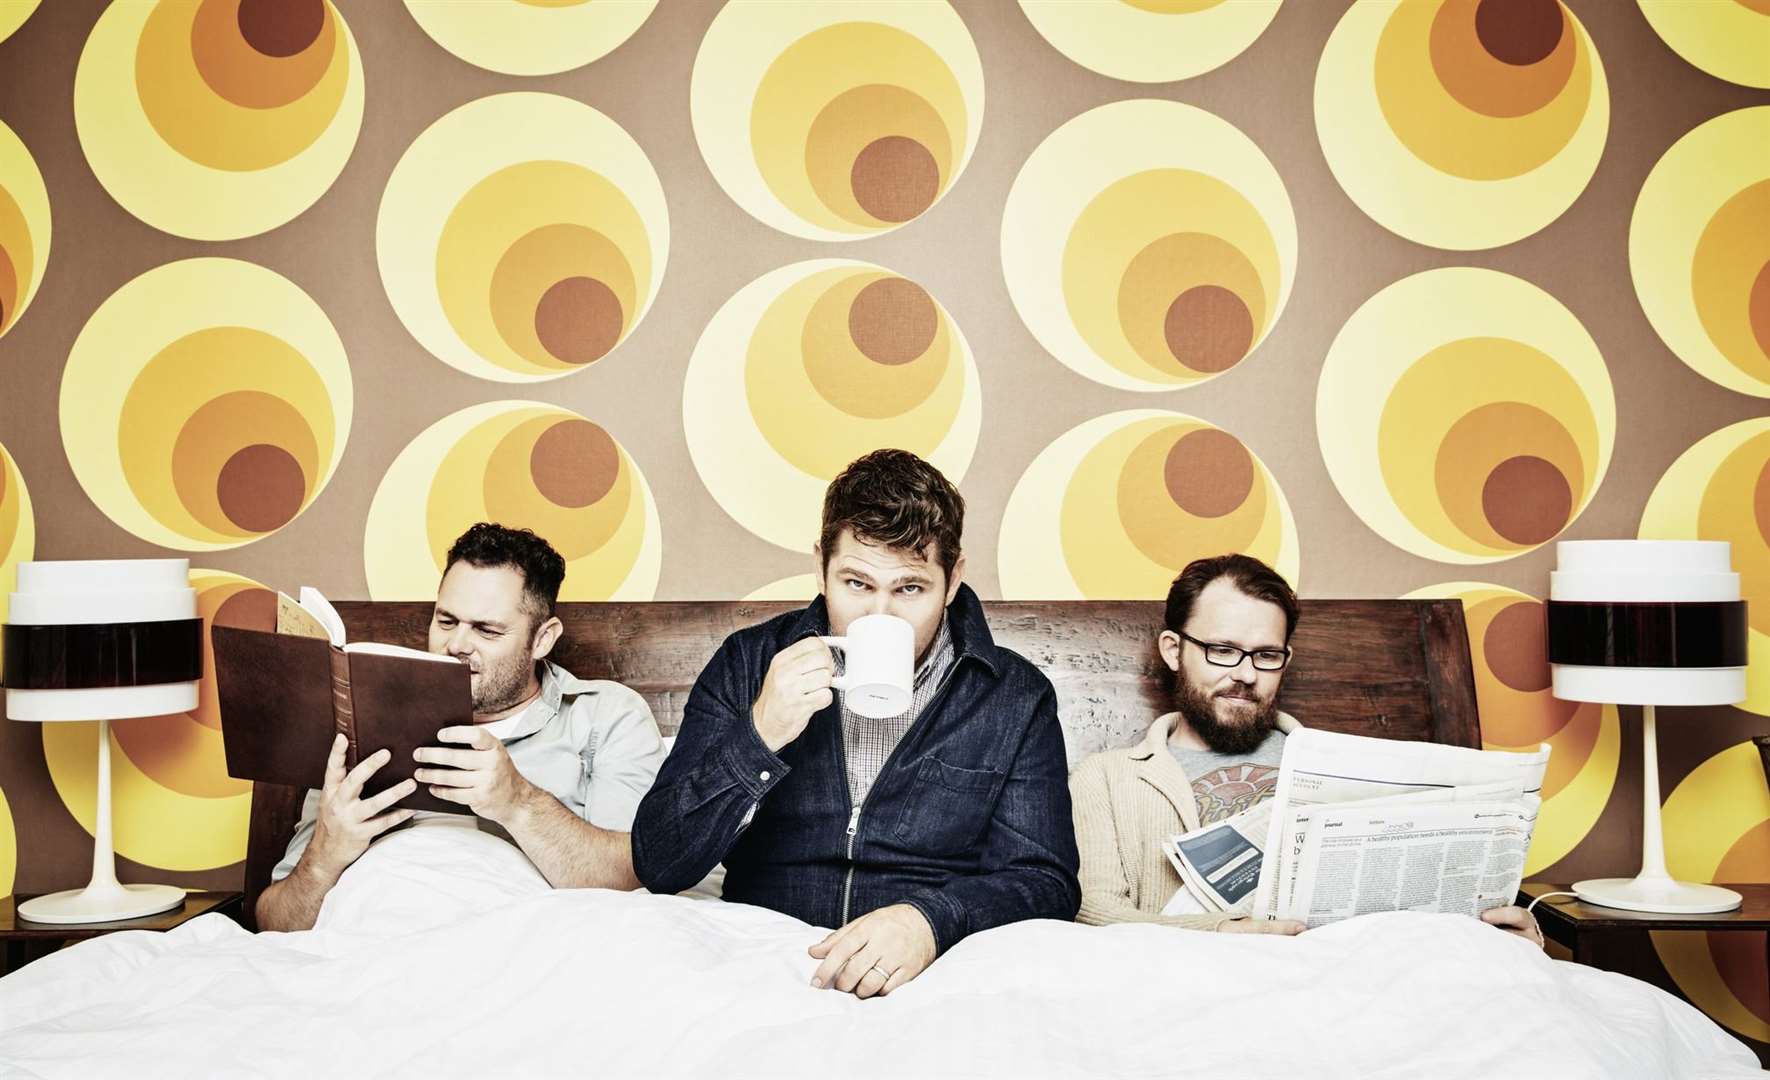 Scouting for Girls will be in Maidstone